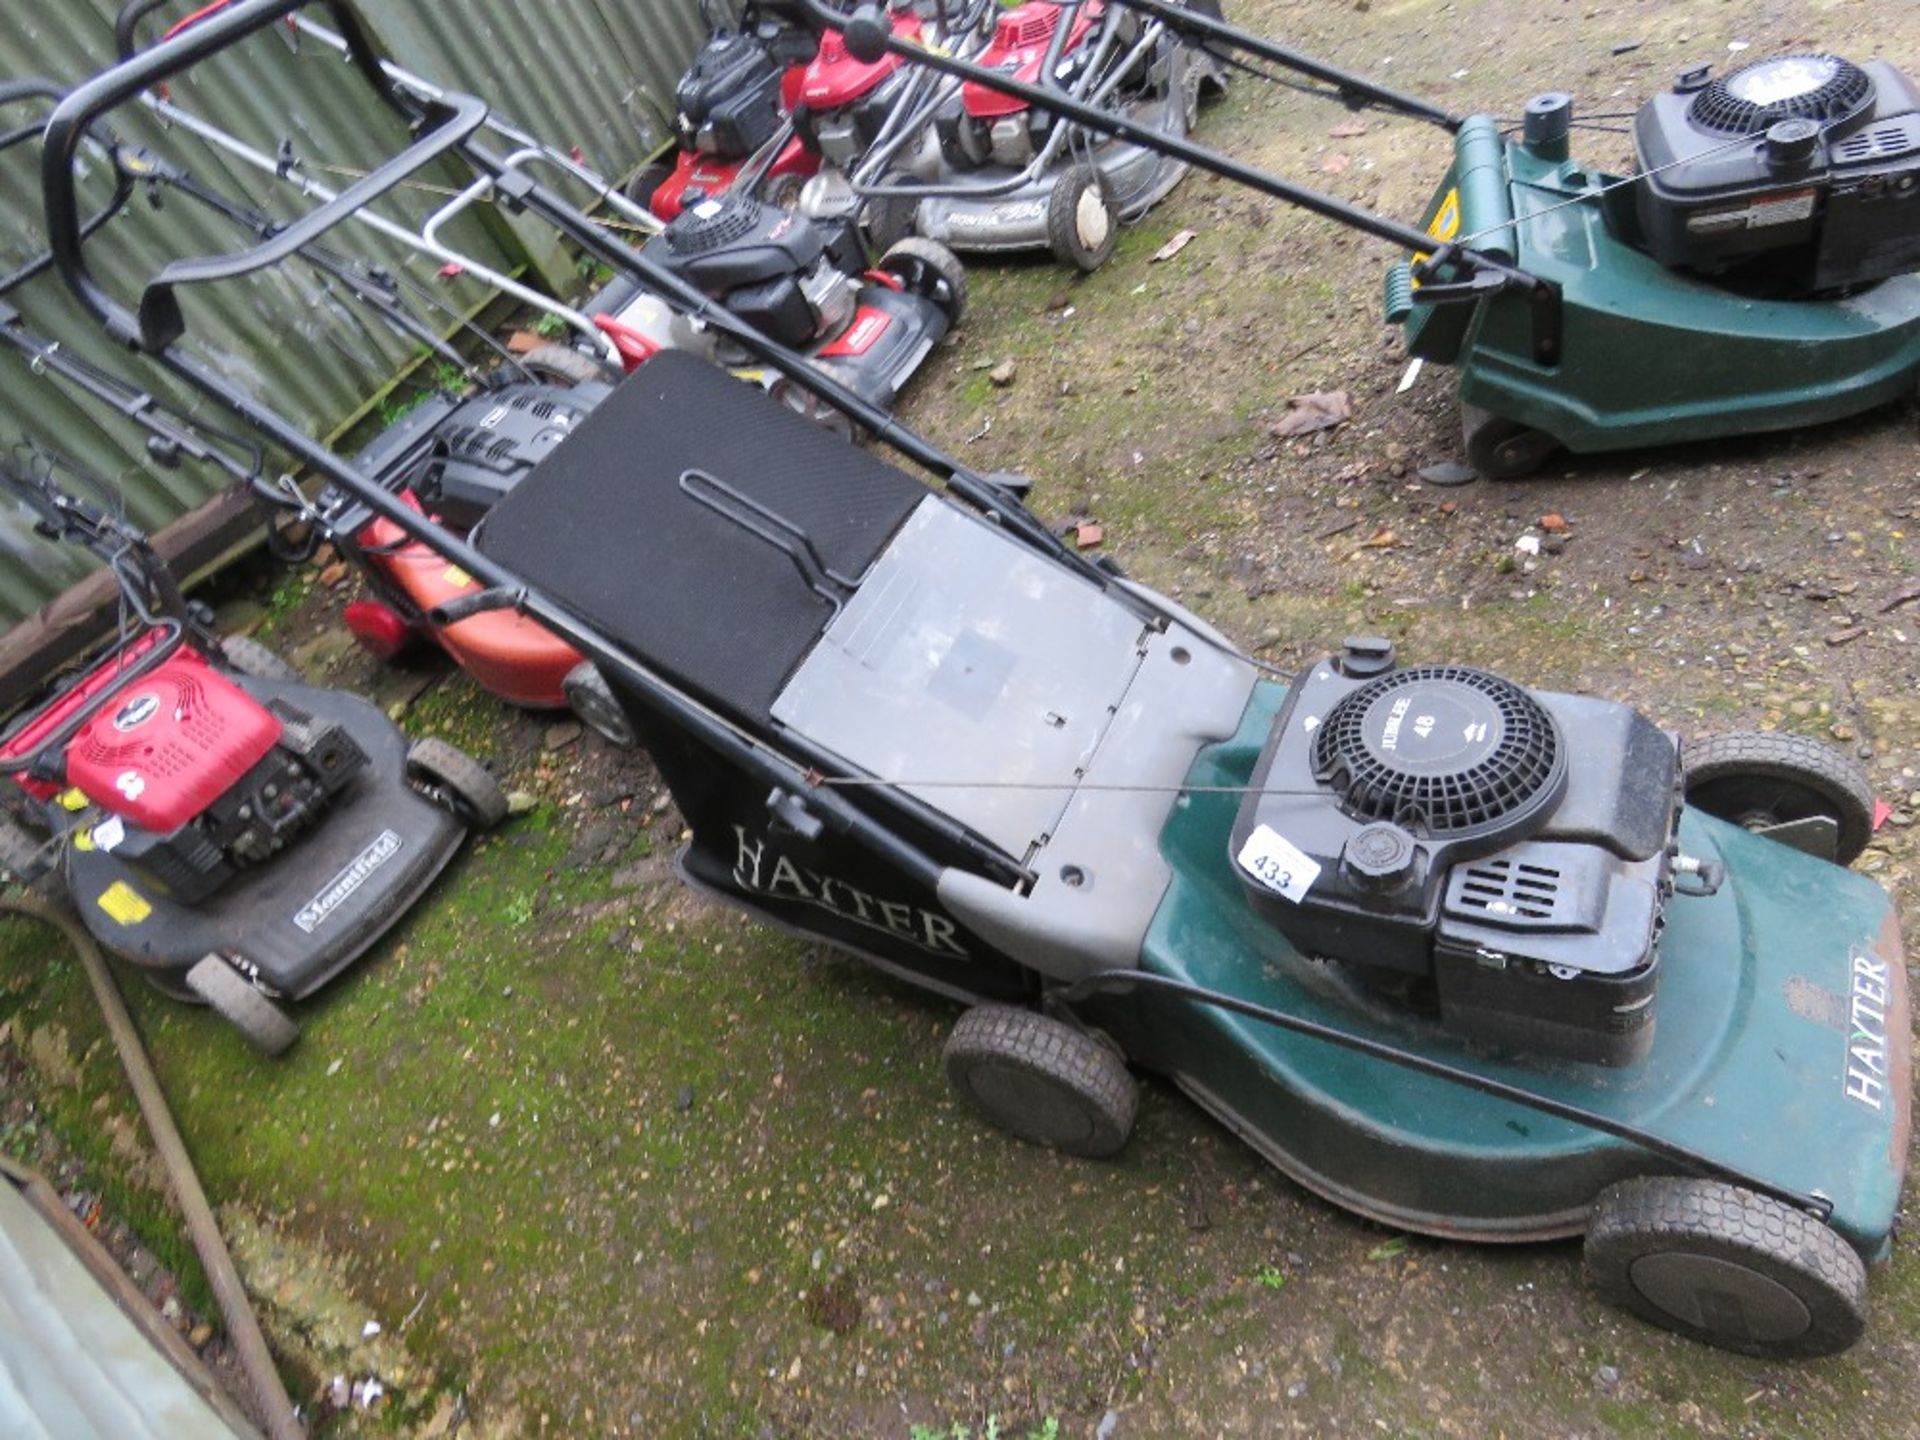 HAYTER JUBILEE 48 MOWER WITH A COLLECTOR BAG. THIS LOT IS SOLD UNDER THE AUCTIONEERS MARGIN SCHEM - Image 2 of 3